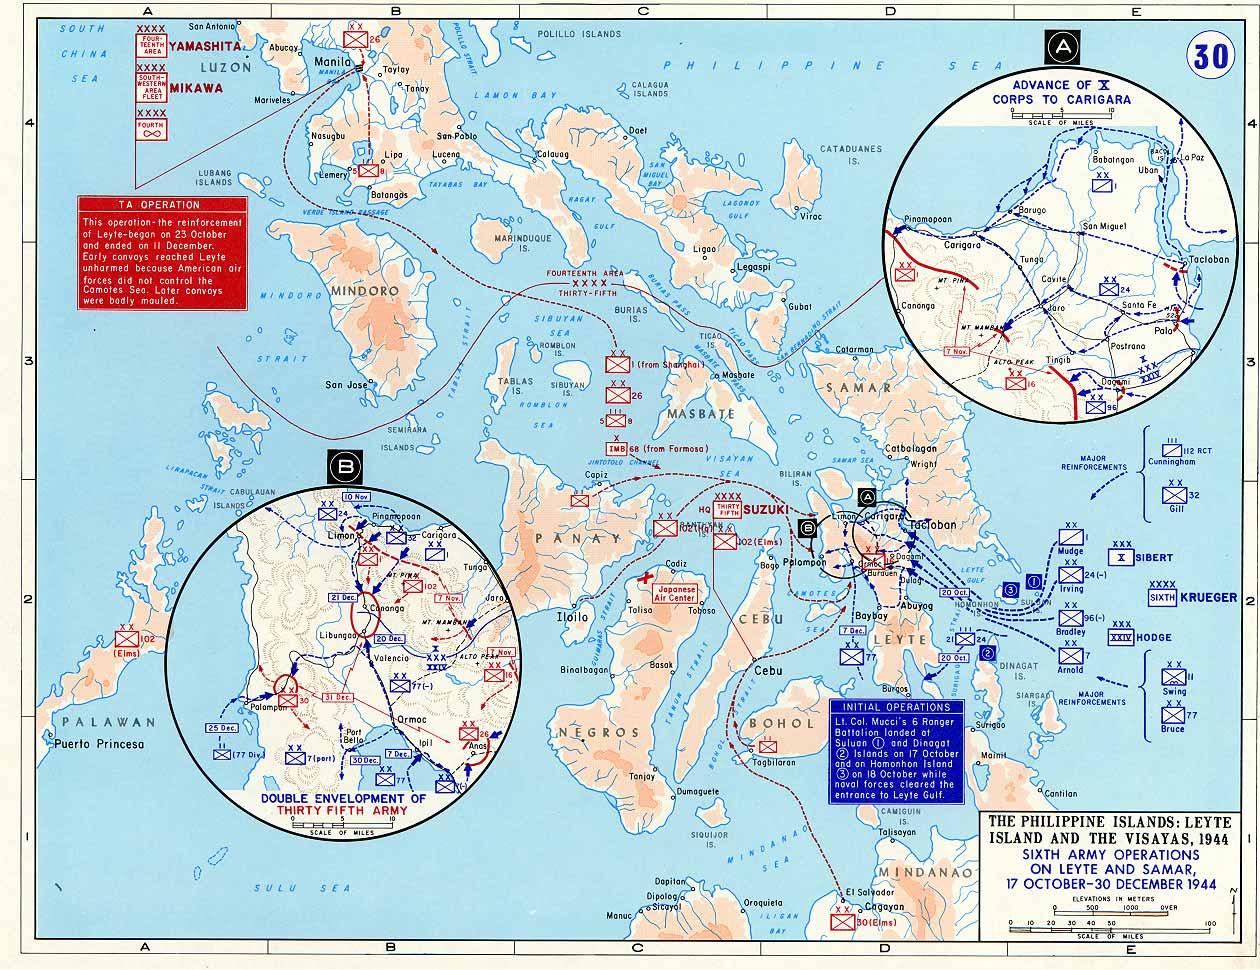 Map depicting US 6th Army operations at Leyte and Samar, Philippine Islands, 17 Oct-30 Dec 1944